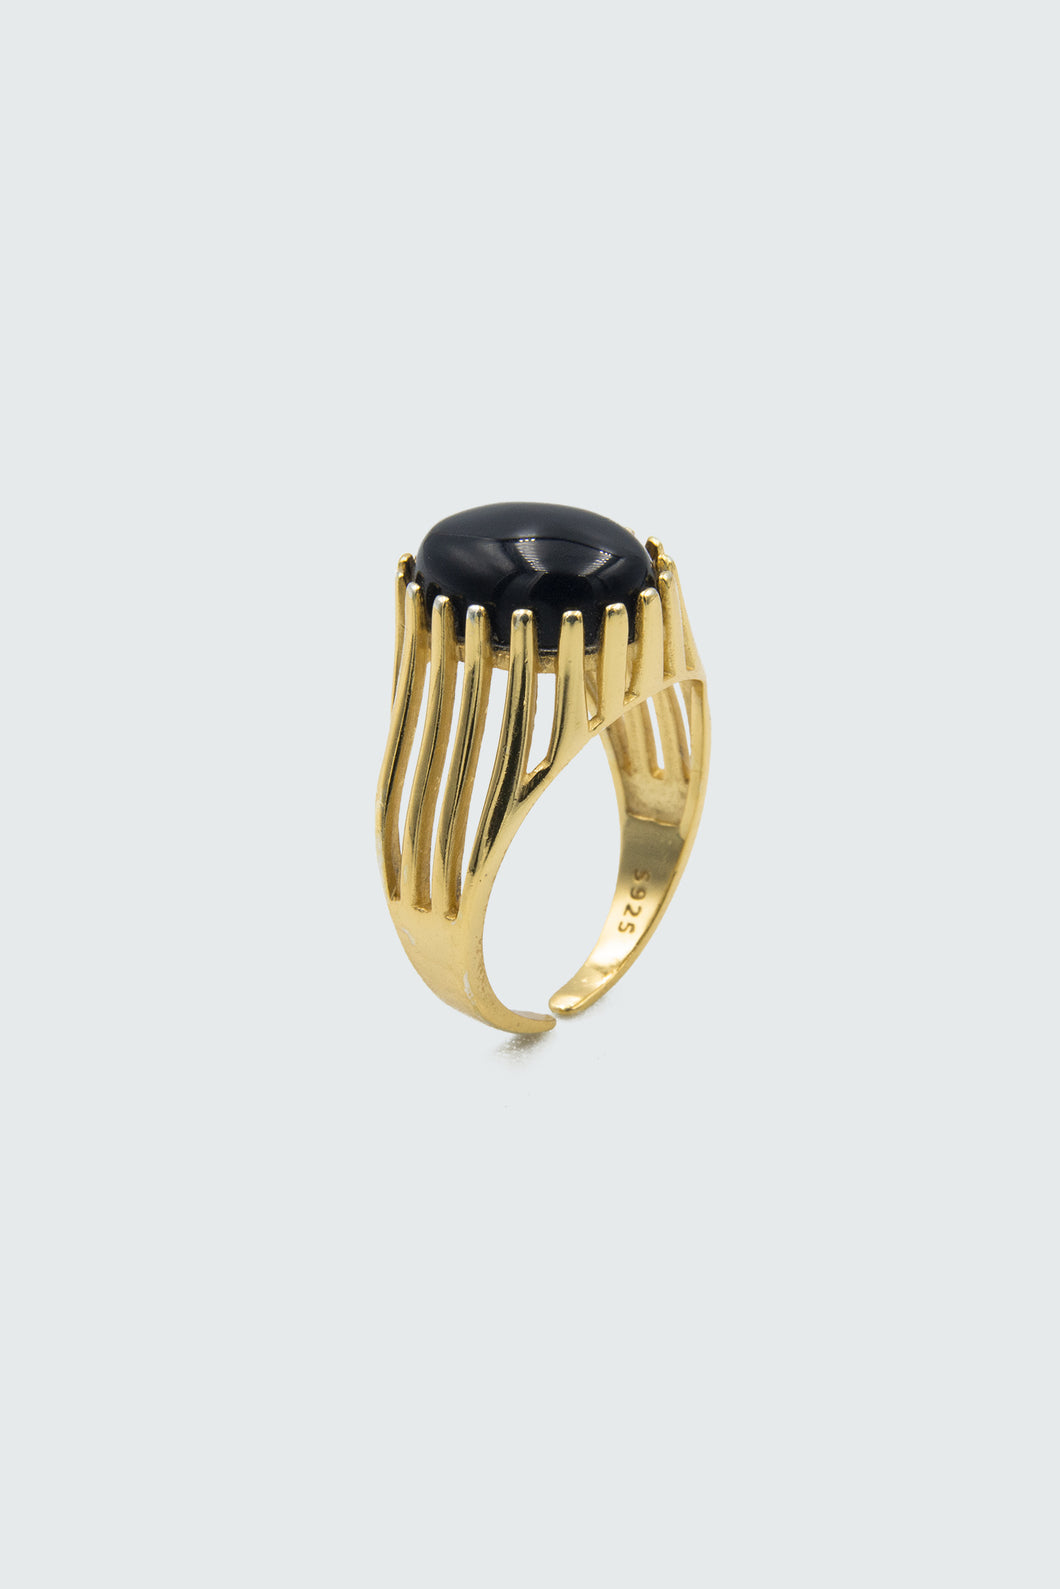 Black Oval Stone Gold Clasped Ring